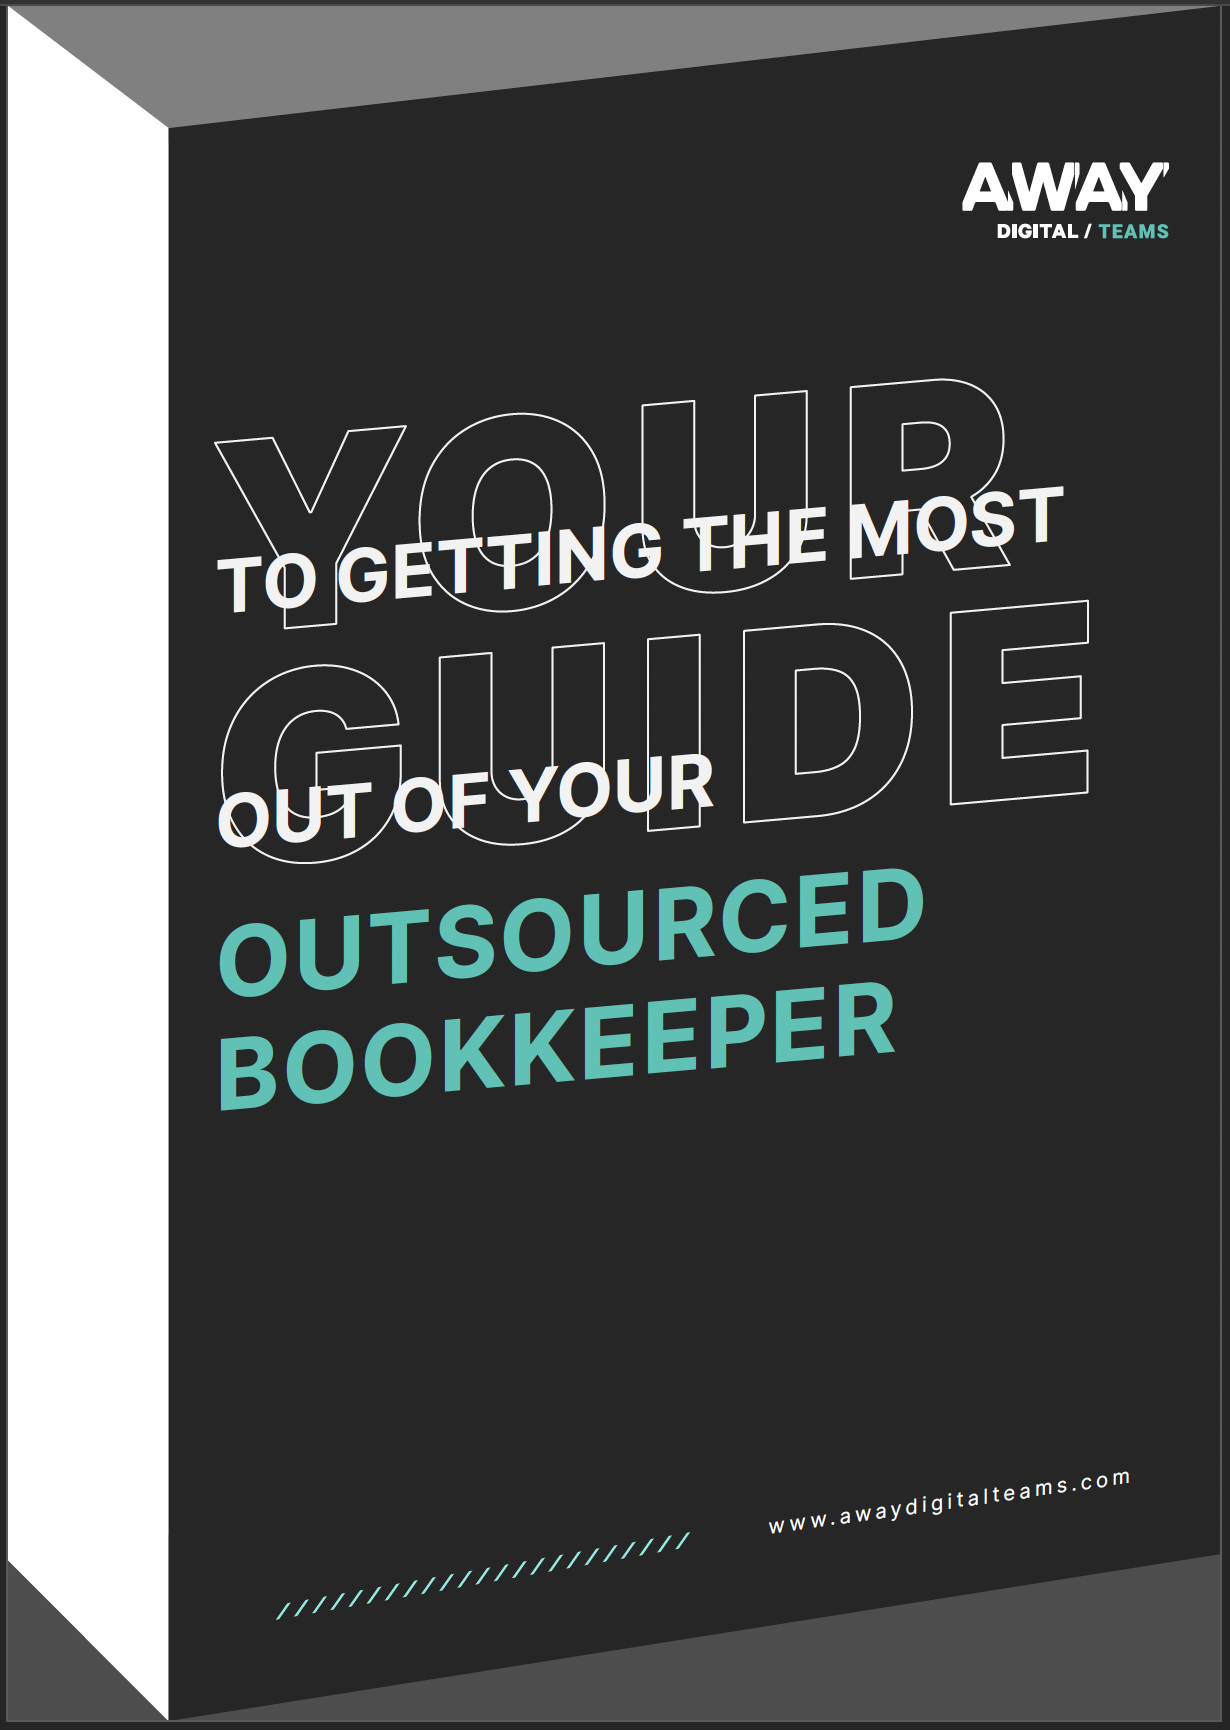 Your Guide to Getting the most out of your Outsourced Bookkeeper